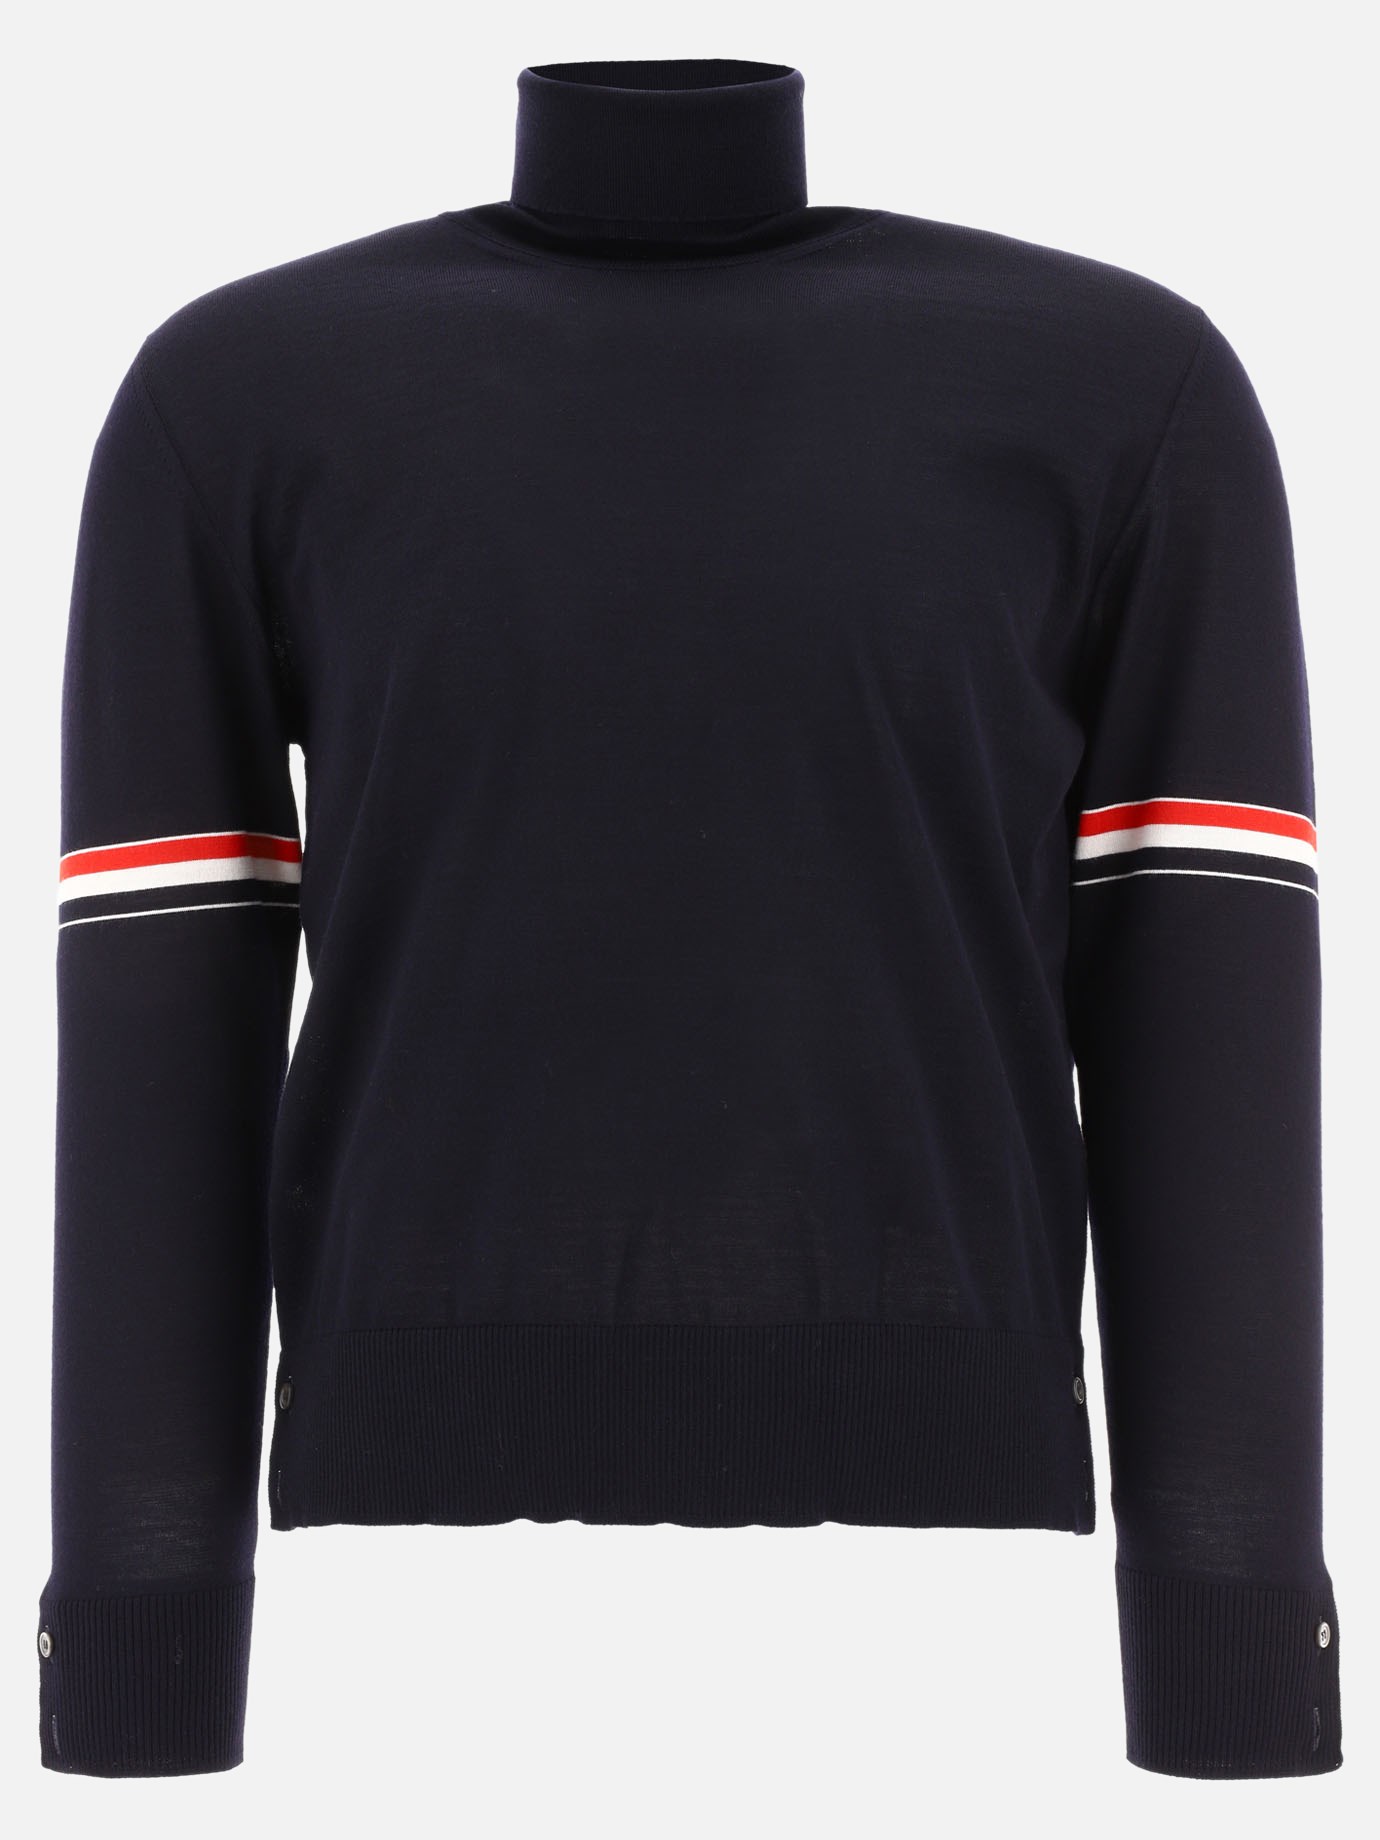  Armbands sweaterby Thom Browne - 3